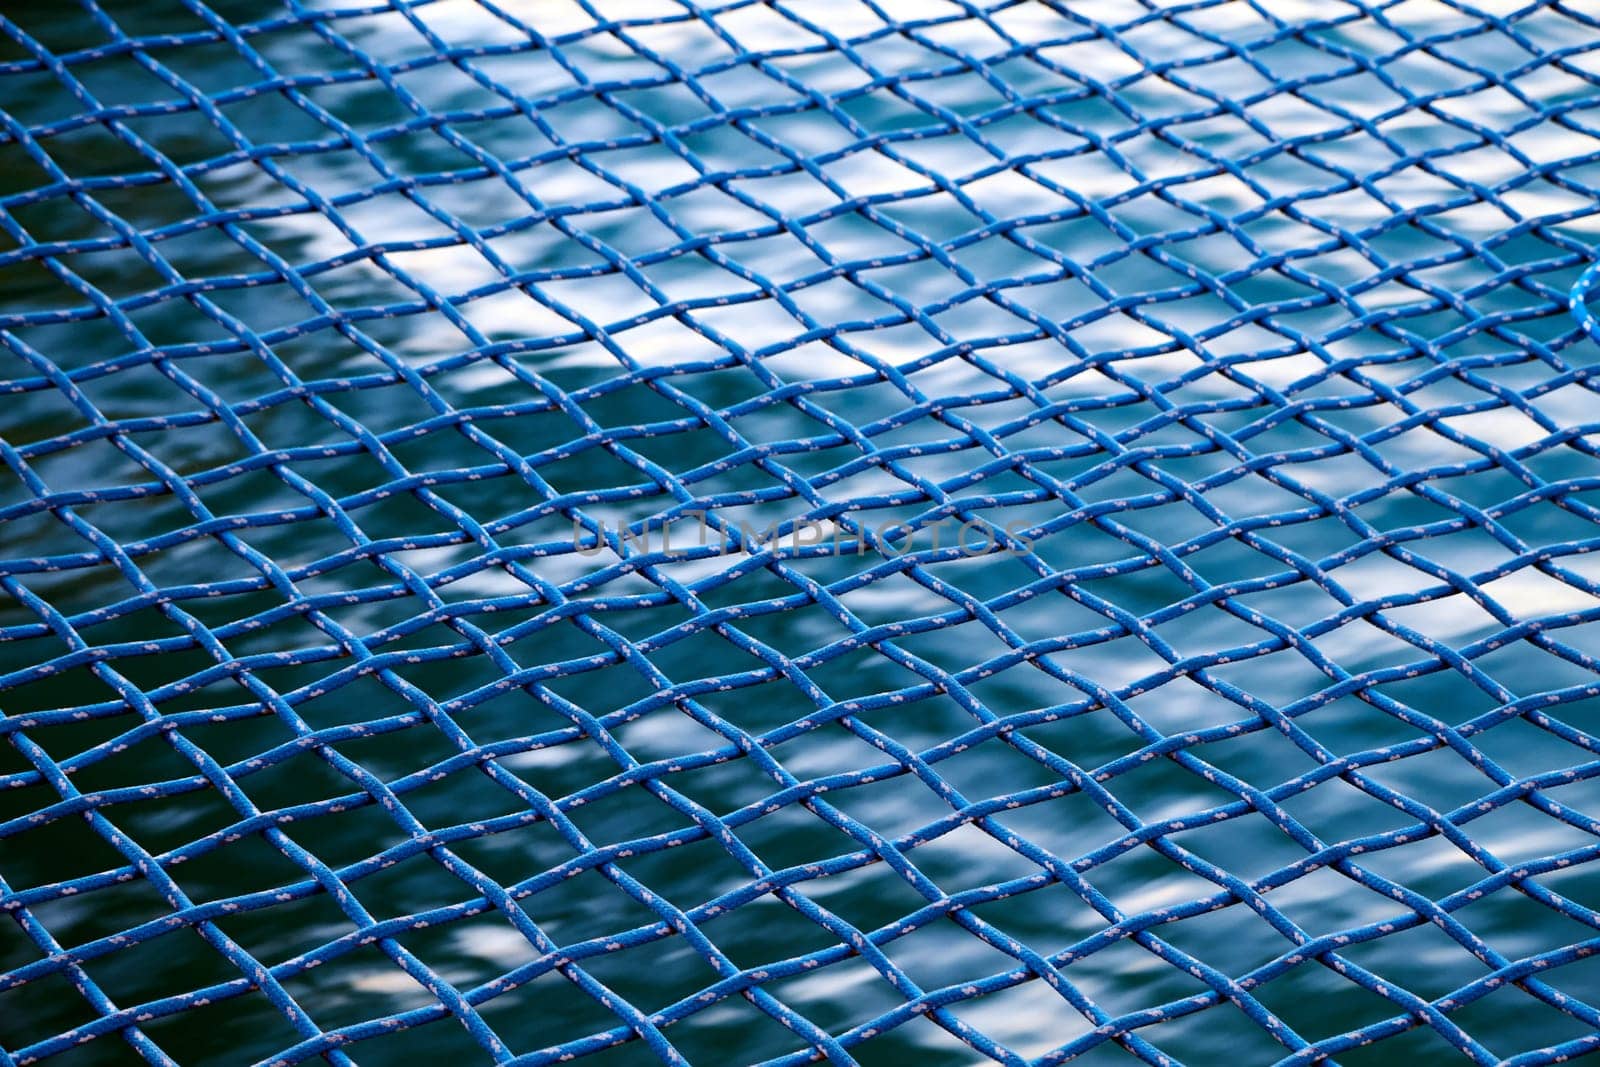 Blue rope pattern from a boat